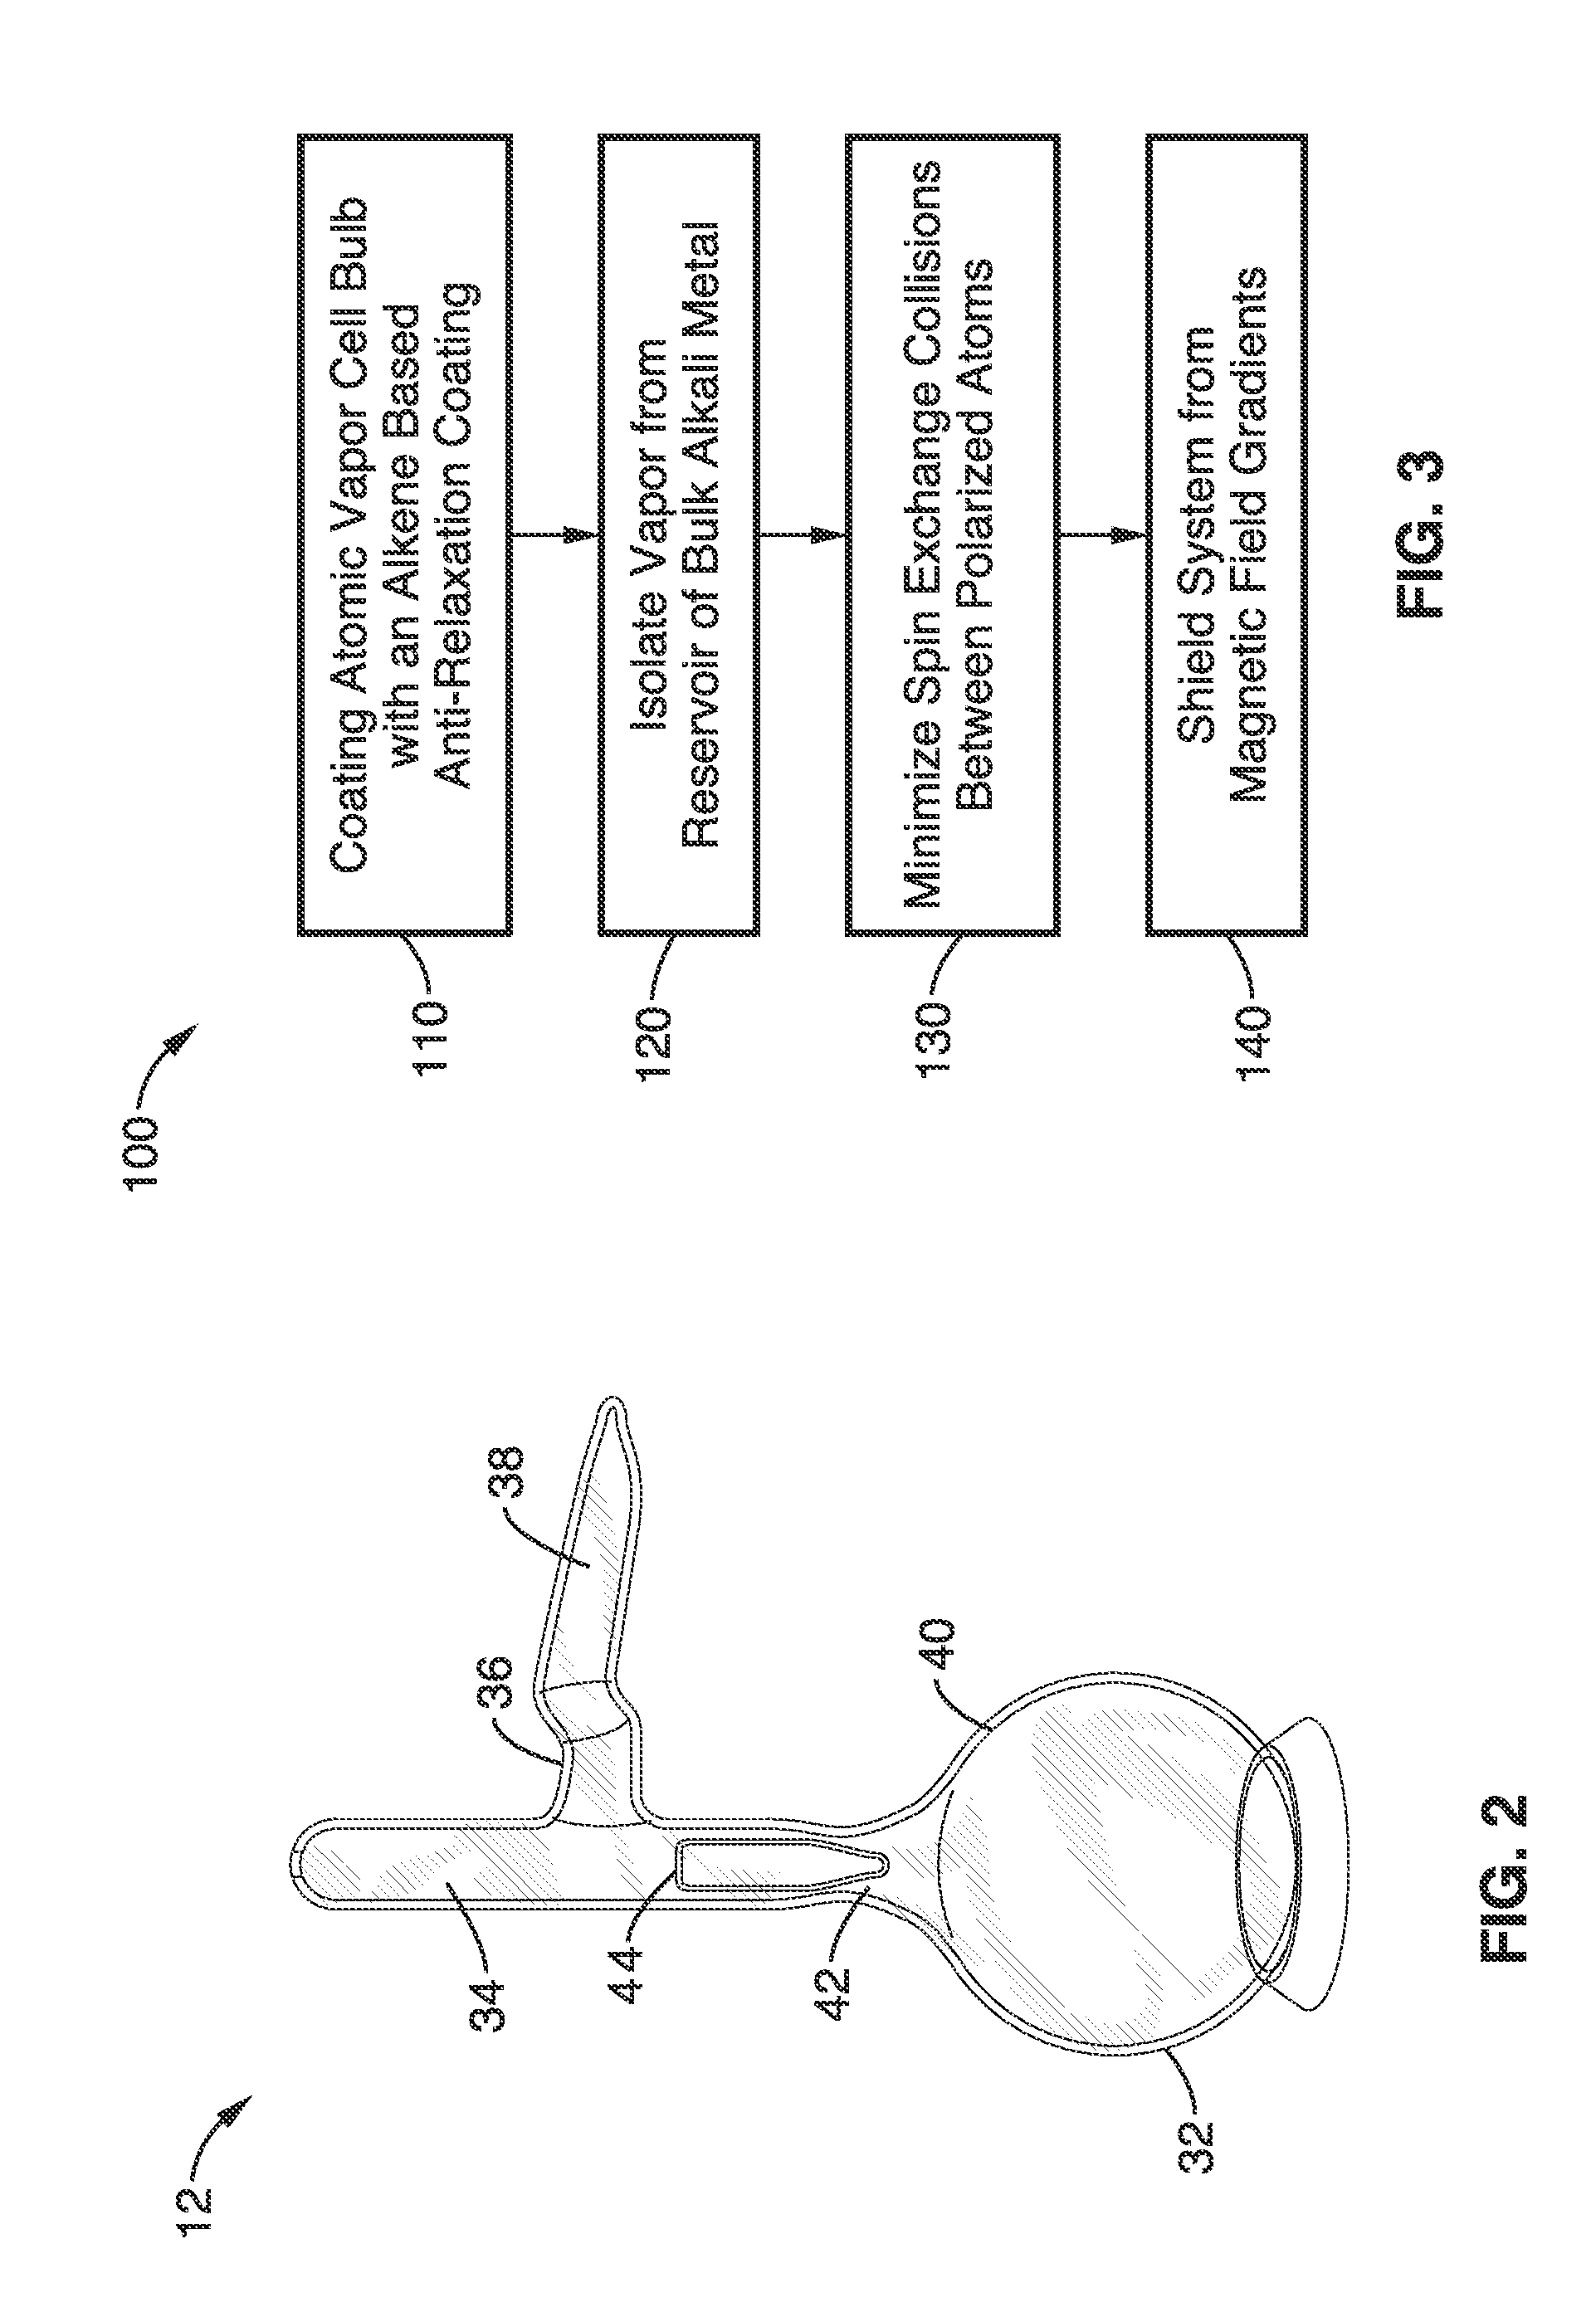 Apparatus and method for increasing spin relaxation times for alkali atoms in alkali vapor cells